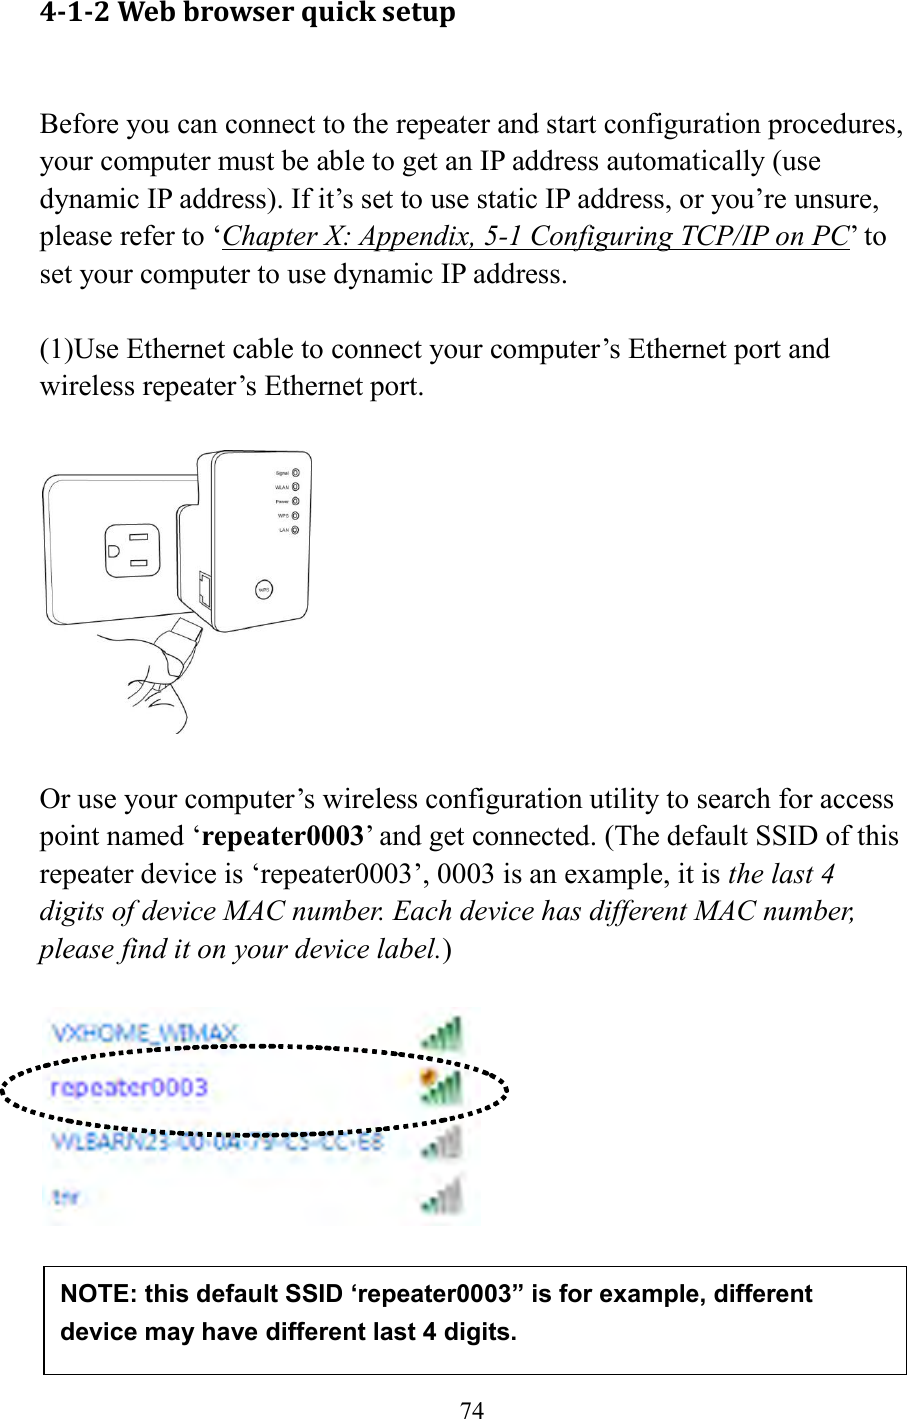  74  4-1-2 Web browser quick setup  Before you can connect to the repeater and start configuration procedures, your computer must be able to get an IP address automatically (use dynamic IP address). If it’s set to use static IP address, or you’re unsure, please refer to ‘Chapter X: Appendix, 5-1 Configuring TCP/IP on PC’ to set your computer to use dynamic IP address.  (1)Use Ethernet cable to connect your computer’s Ethernet port and wireless repeater’s Ethernet port.    Or use your computer’s wireless configuration utility to search for access point named ‘repeater0003’ and get connected. (The default SSID of this repeater device is ‘repeater0003’, 0003 is an example, it is the last 4 digits of device MAC number. Each device has different MAC number, please find it on your device label.)       NOTE: this default SSID ‘repeater0003” is for example, different device may have different last 4 digits. 